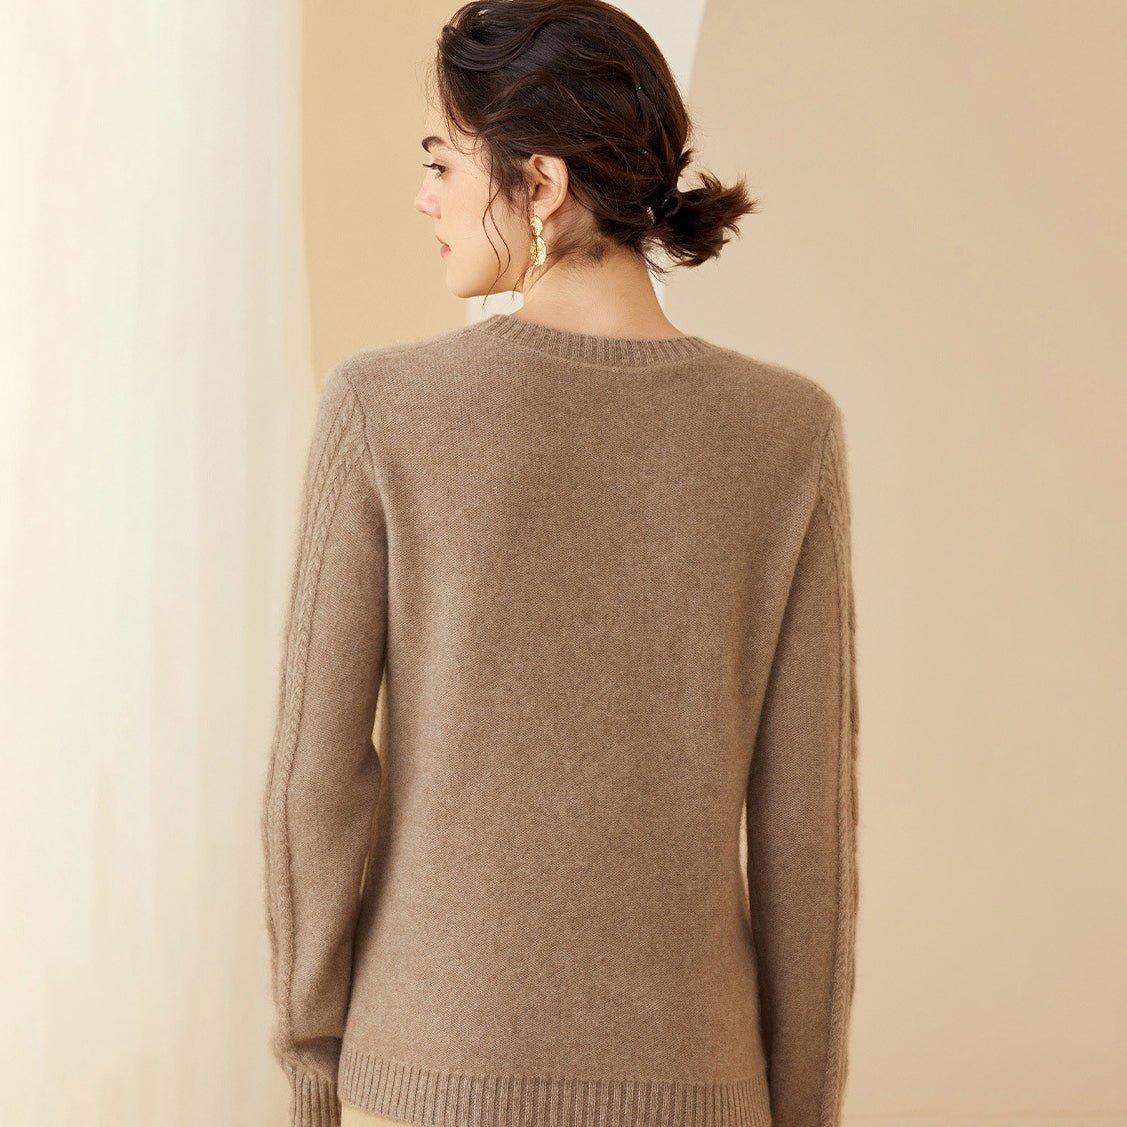 Mock Neck Cashmere Sweater For Women Long Sleeve Pullover Cashmere Tops - slipintosoft